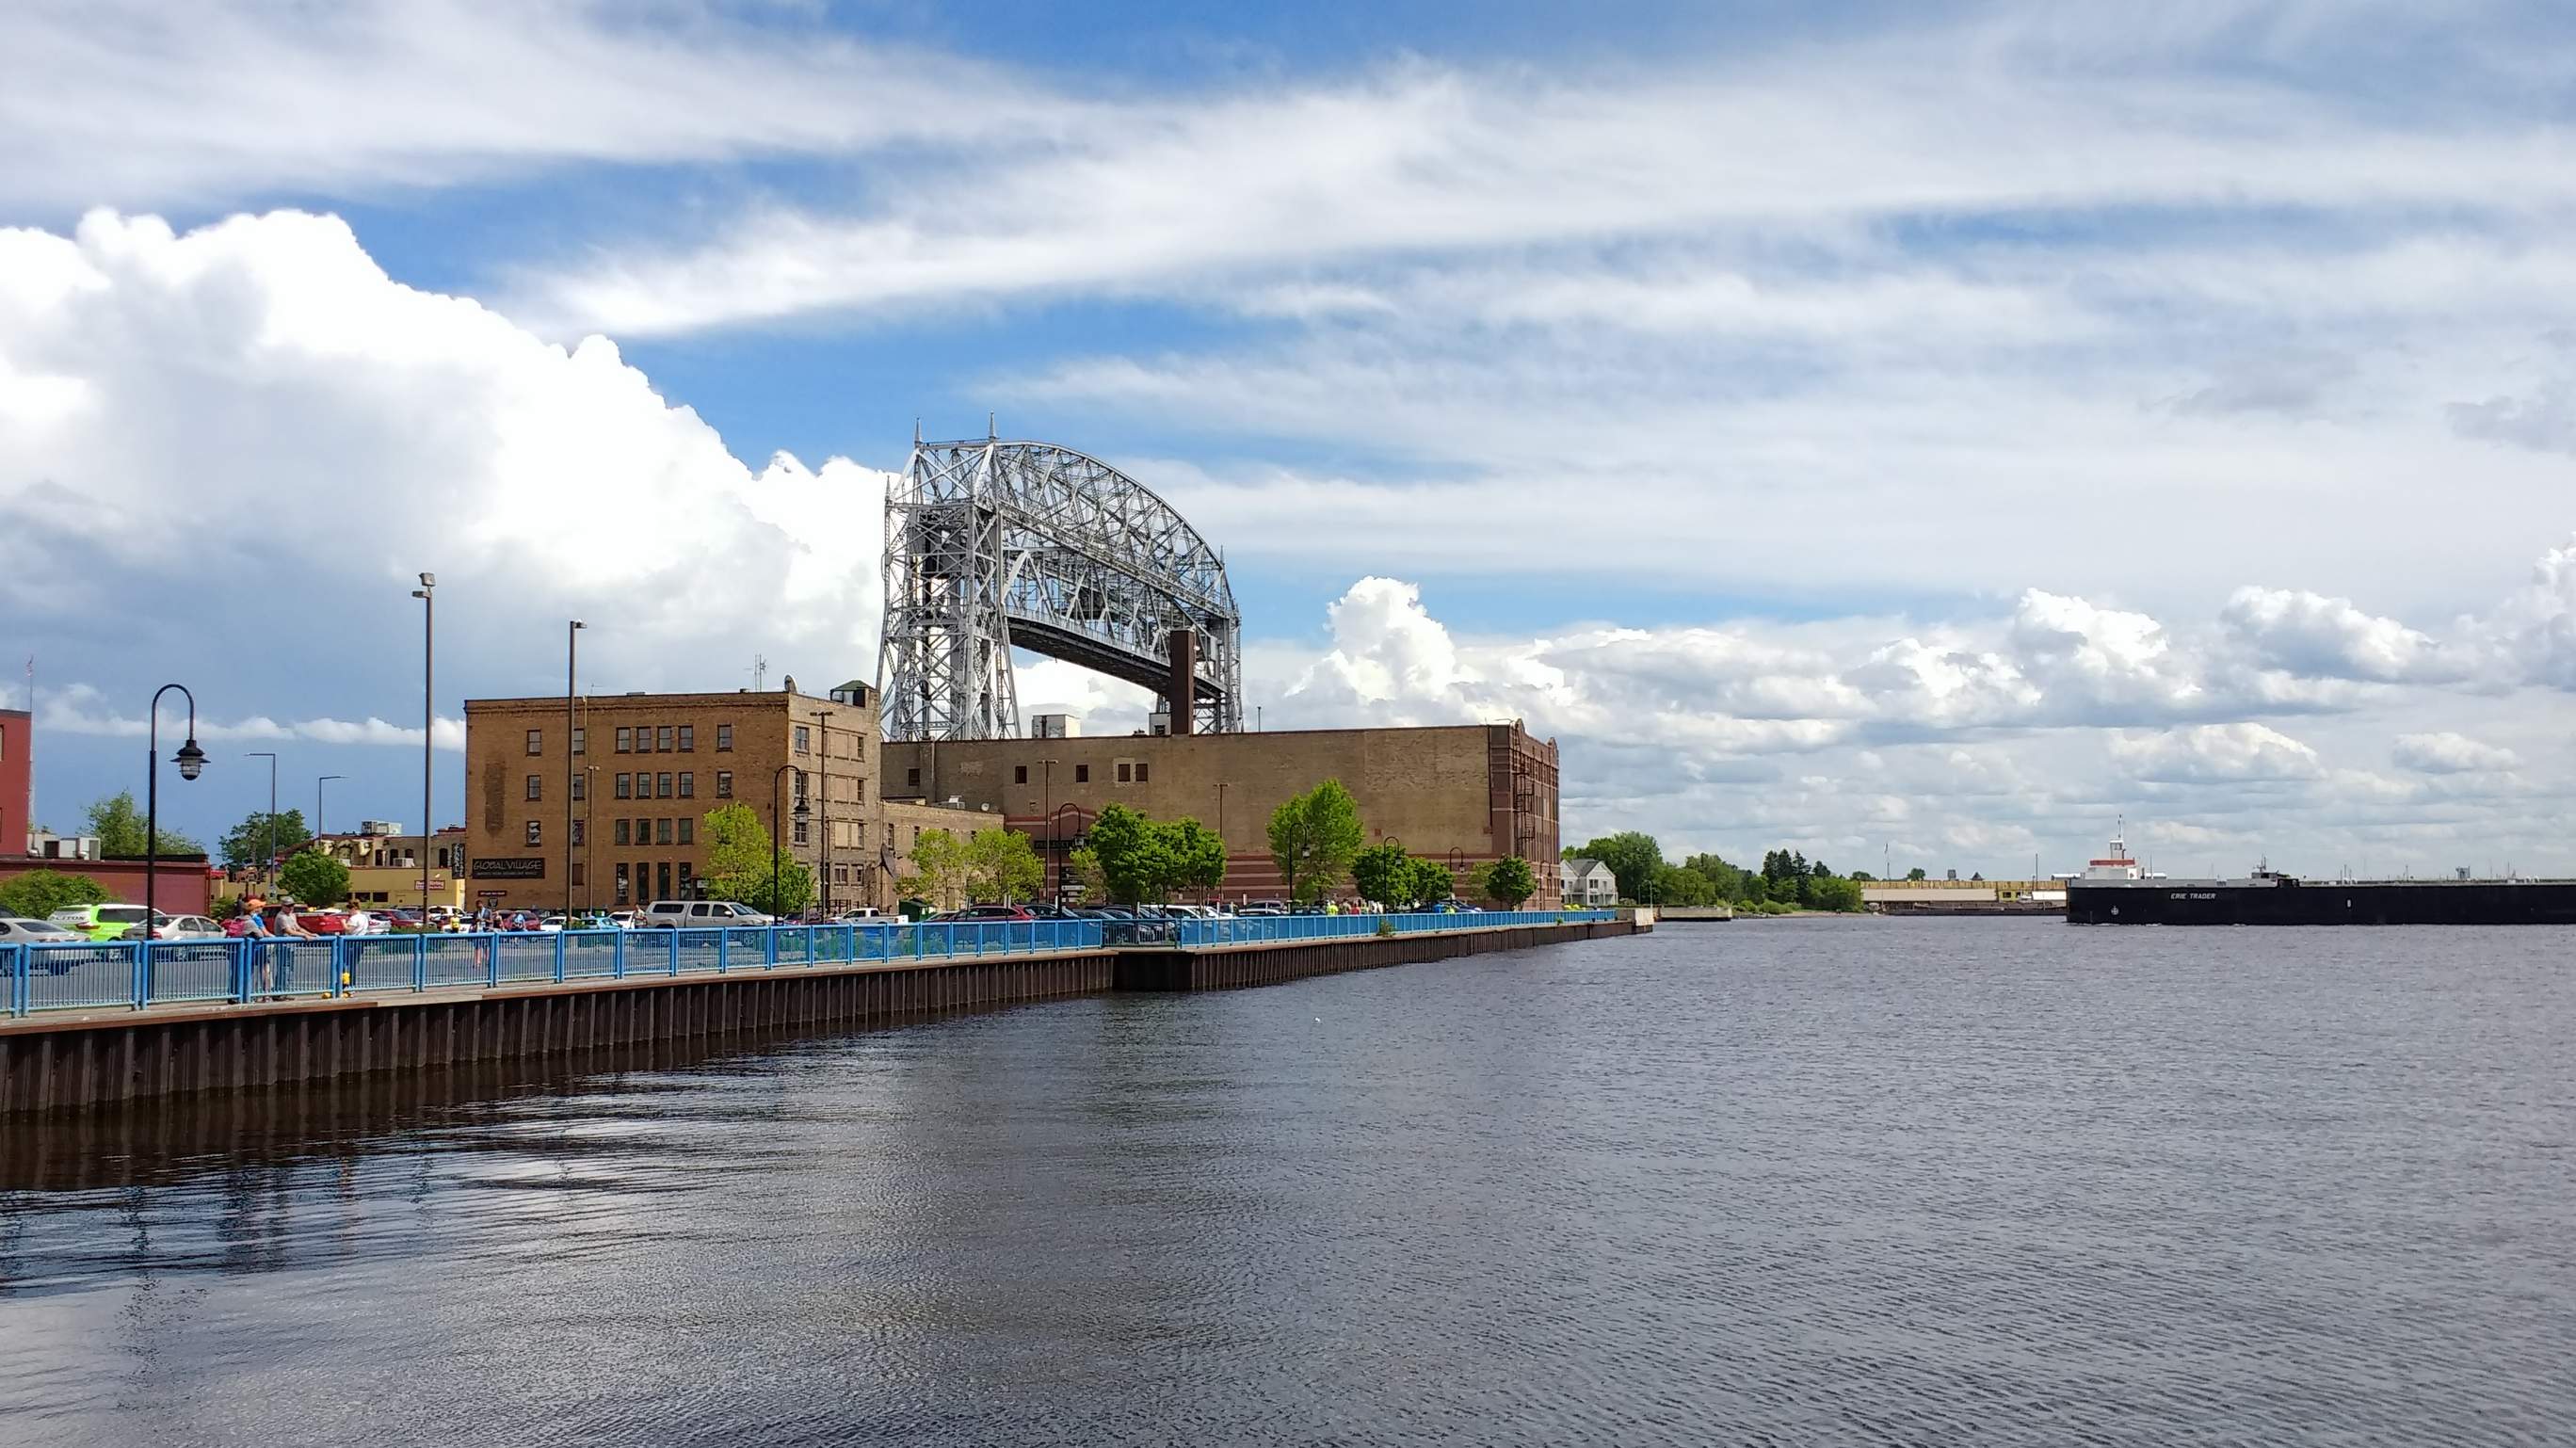 A long ship about to pass under the Aerial Lift Bridge in Duluth, Minnesota.